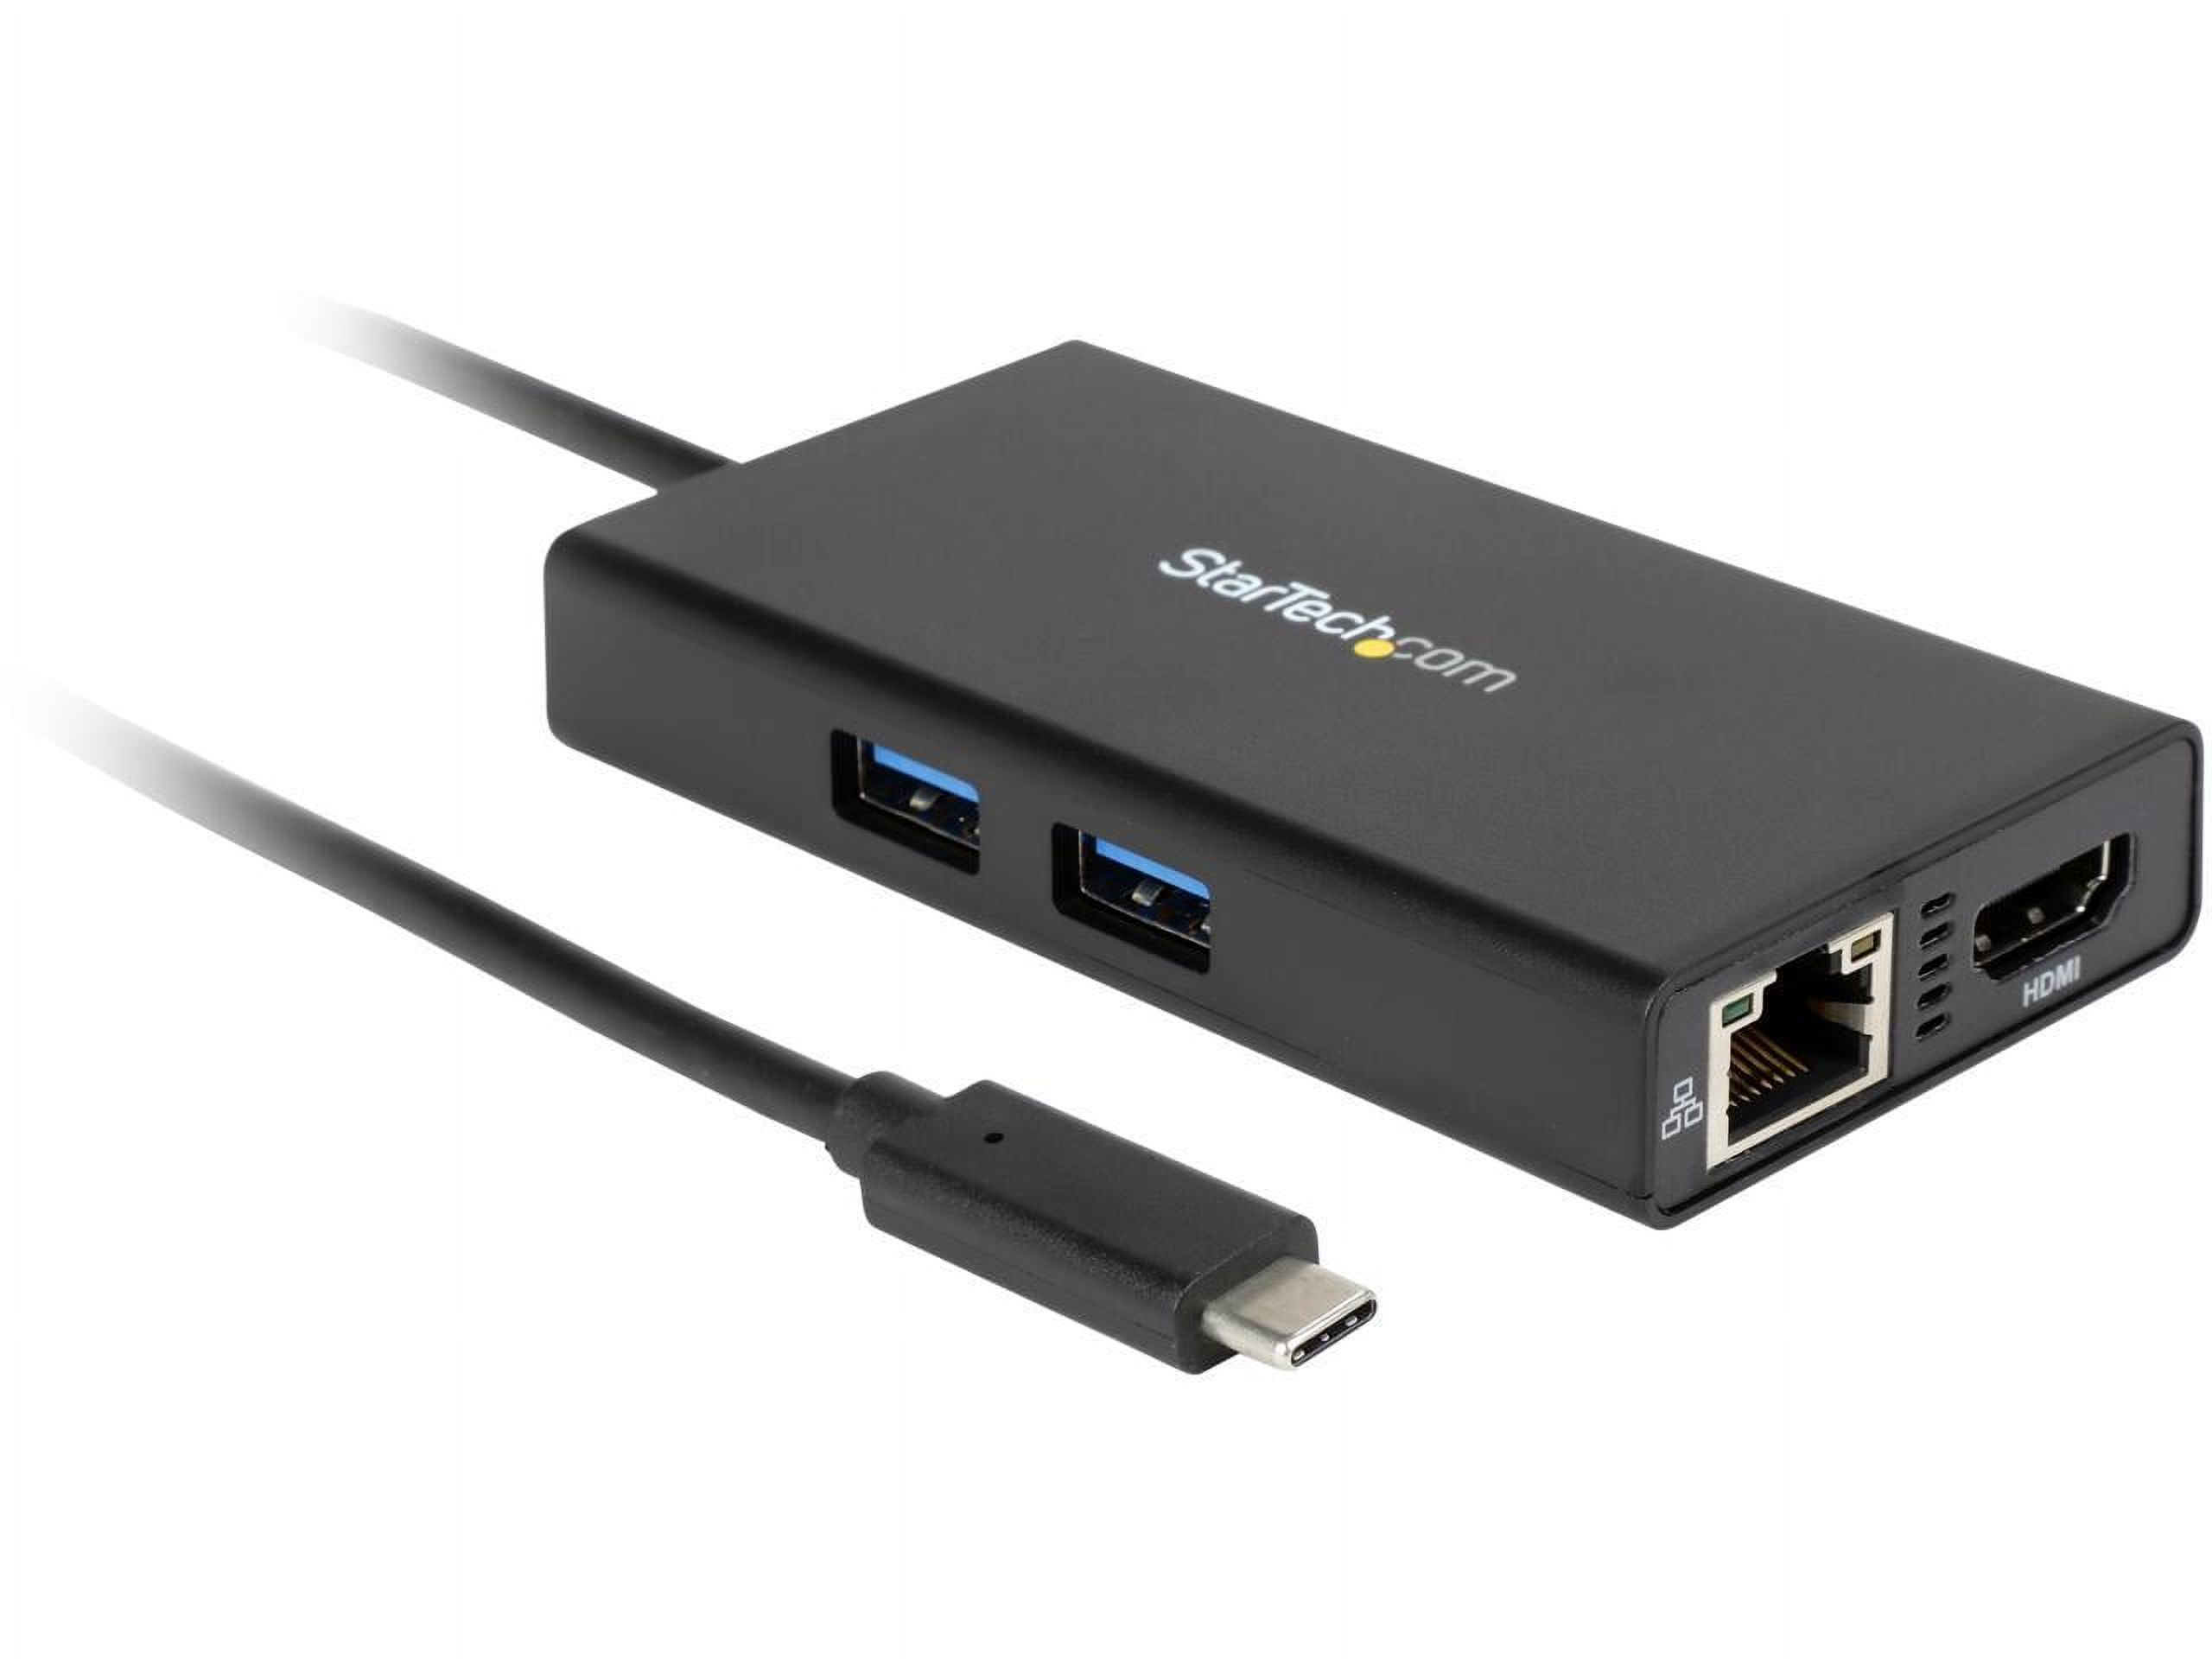 StarTech.com DKT30CHPD USB-C Multiport Adapter with 4K HDMI - 2x USB-A Ports - 60W PD - Black - image 1 of 3